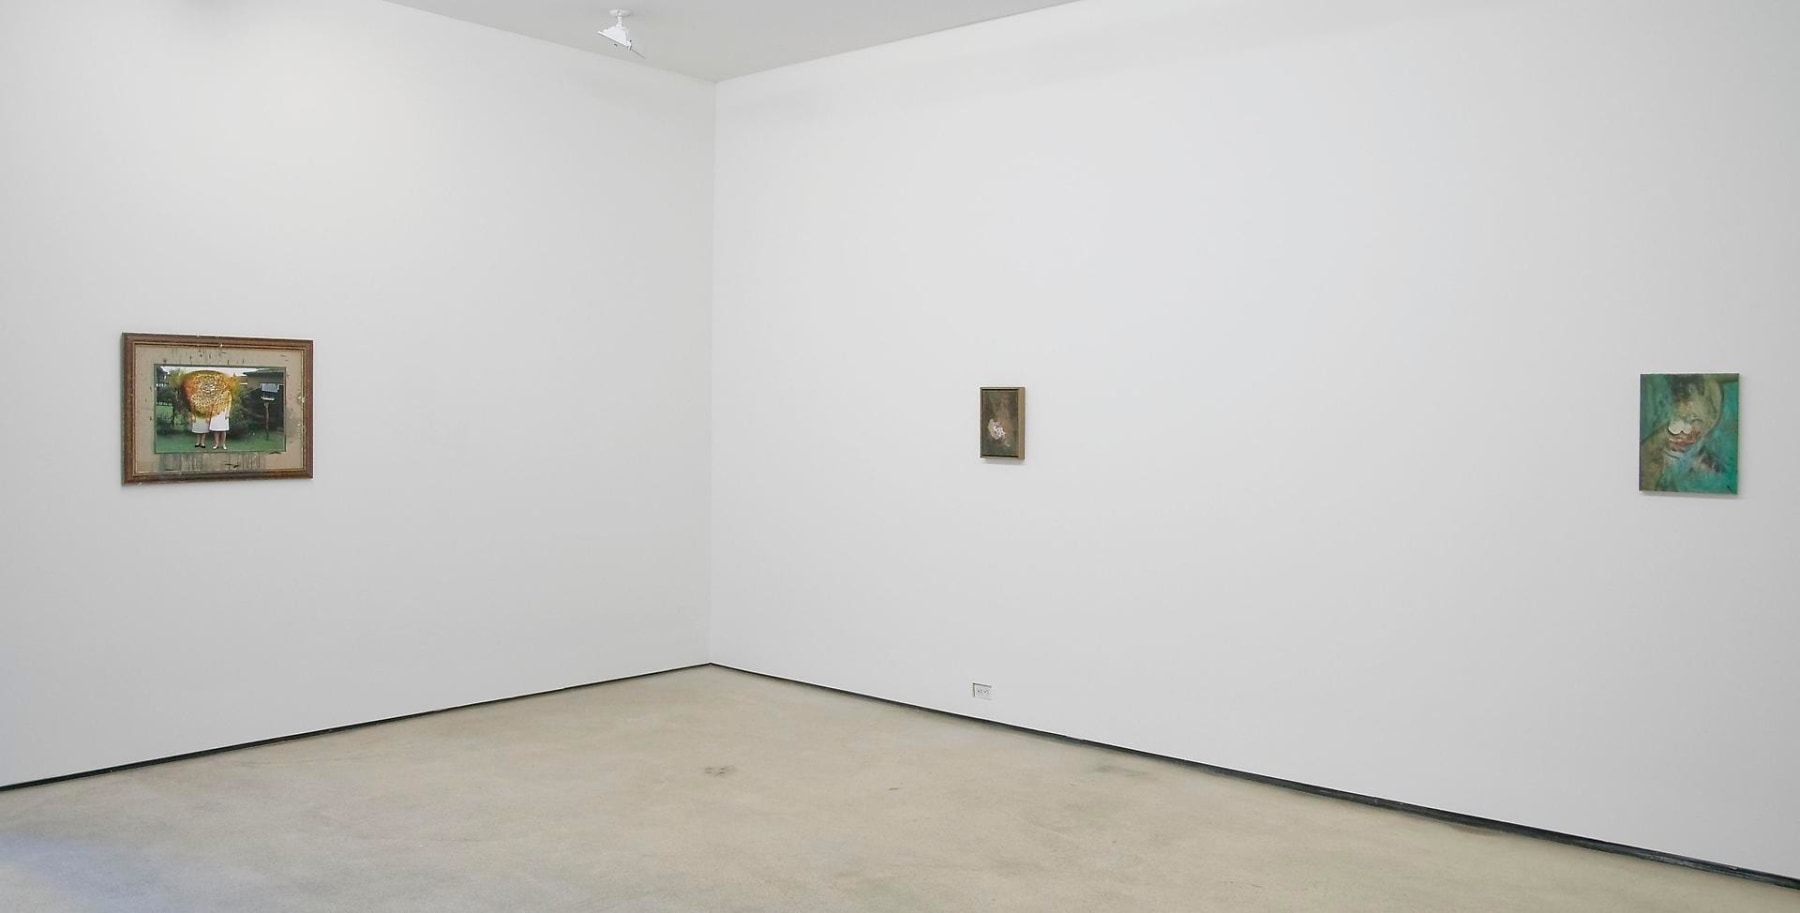  Installation view, Ross Chisholm, Garden of Forking Paths, Marc Jancou, New York, September 8 - October 22, 2011